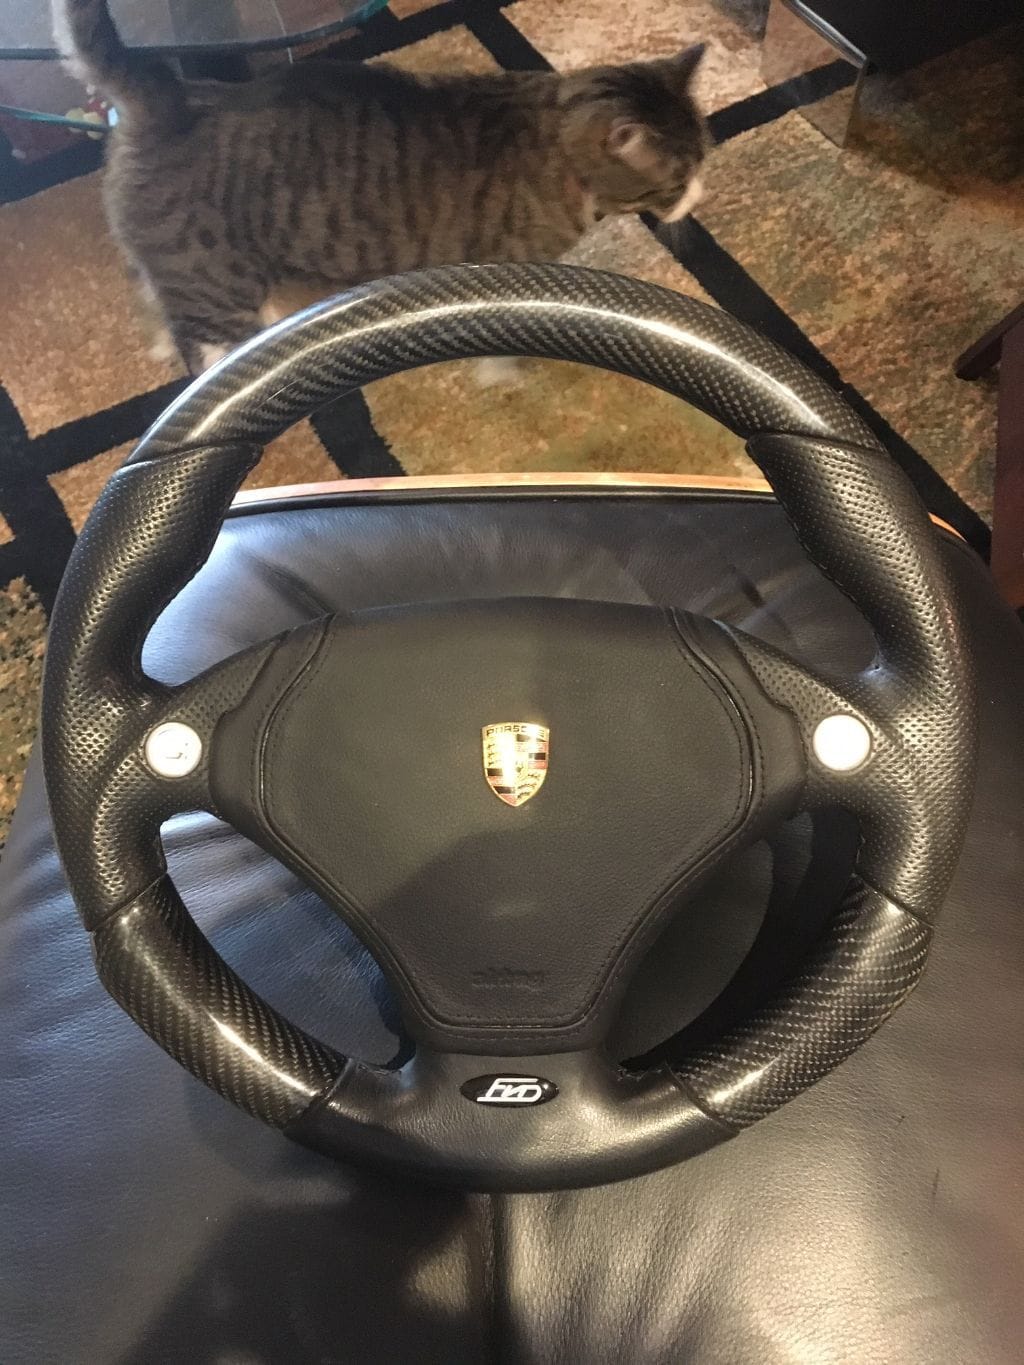 Accessories - FS: FVD Airbag Steering Wheel, Black Perforated leather/CF & Matching Shift Knob - Used - 1999 to 2005 Porsche 911 - Denver, CO 80221, United States